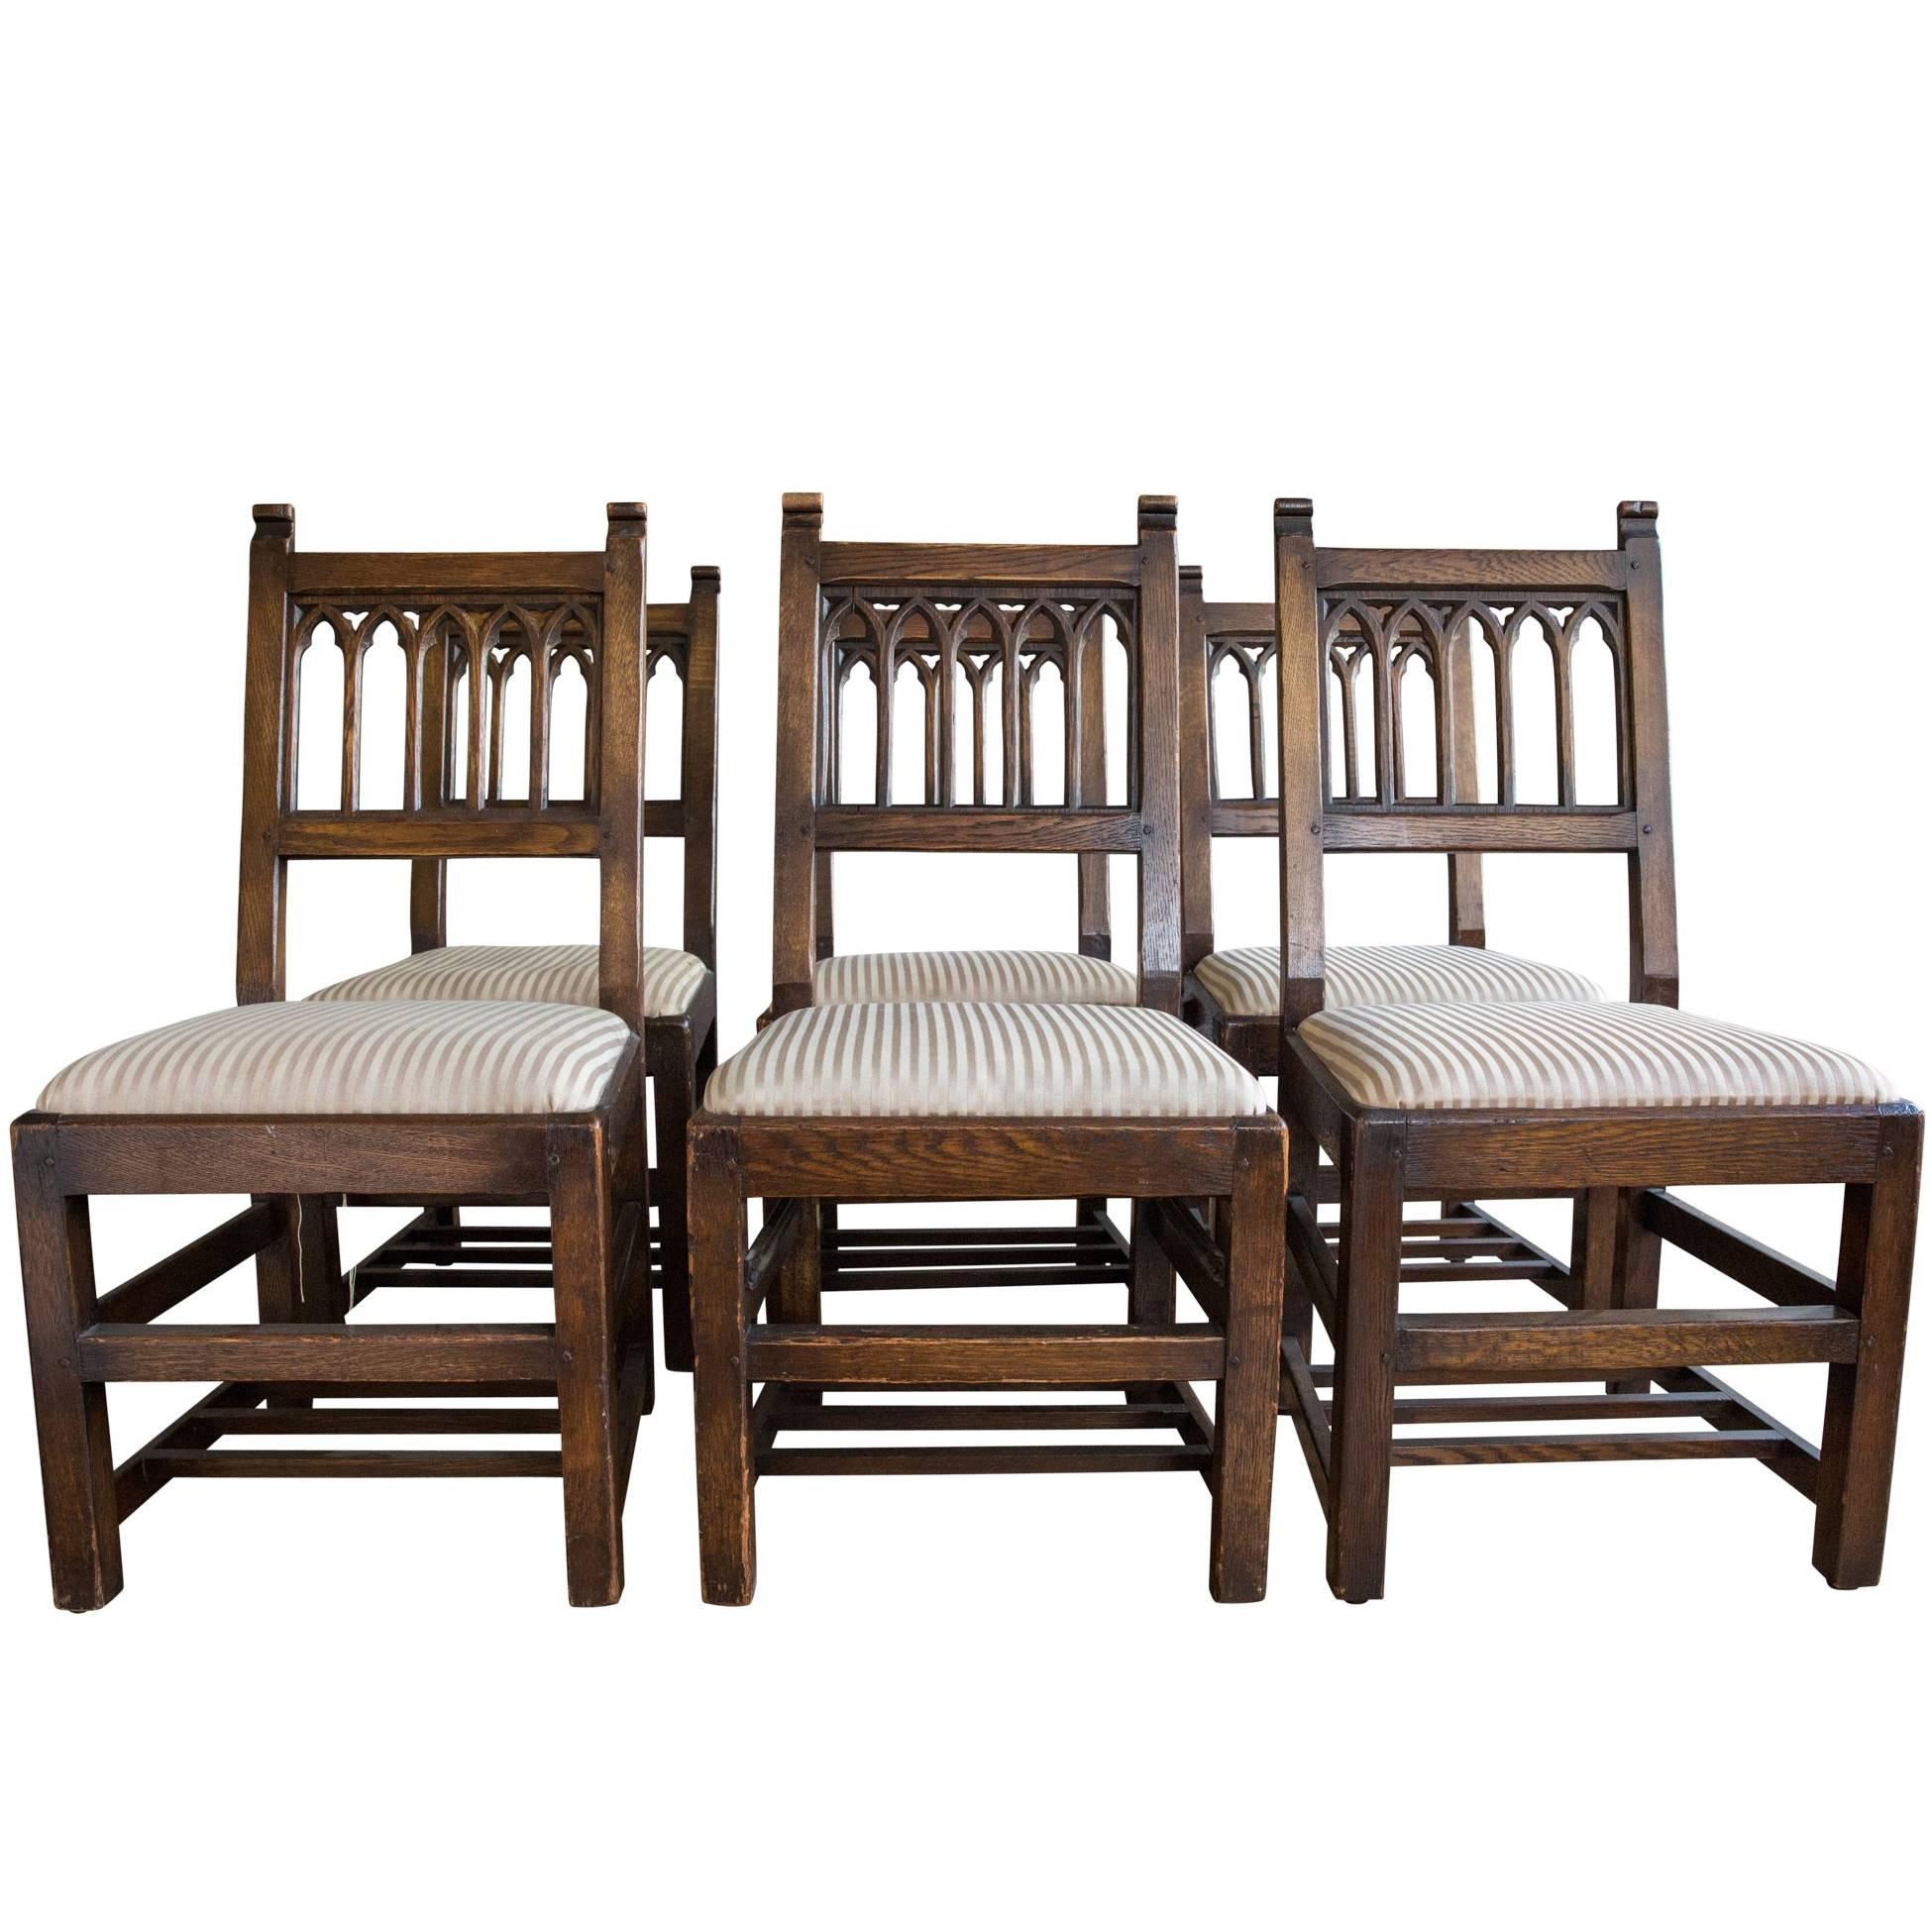 Set of Six Oak Gothic Revival Pew Chairs from Riverside Church For Sale